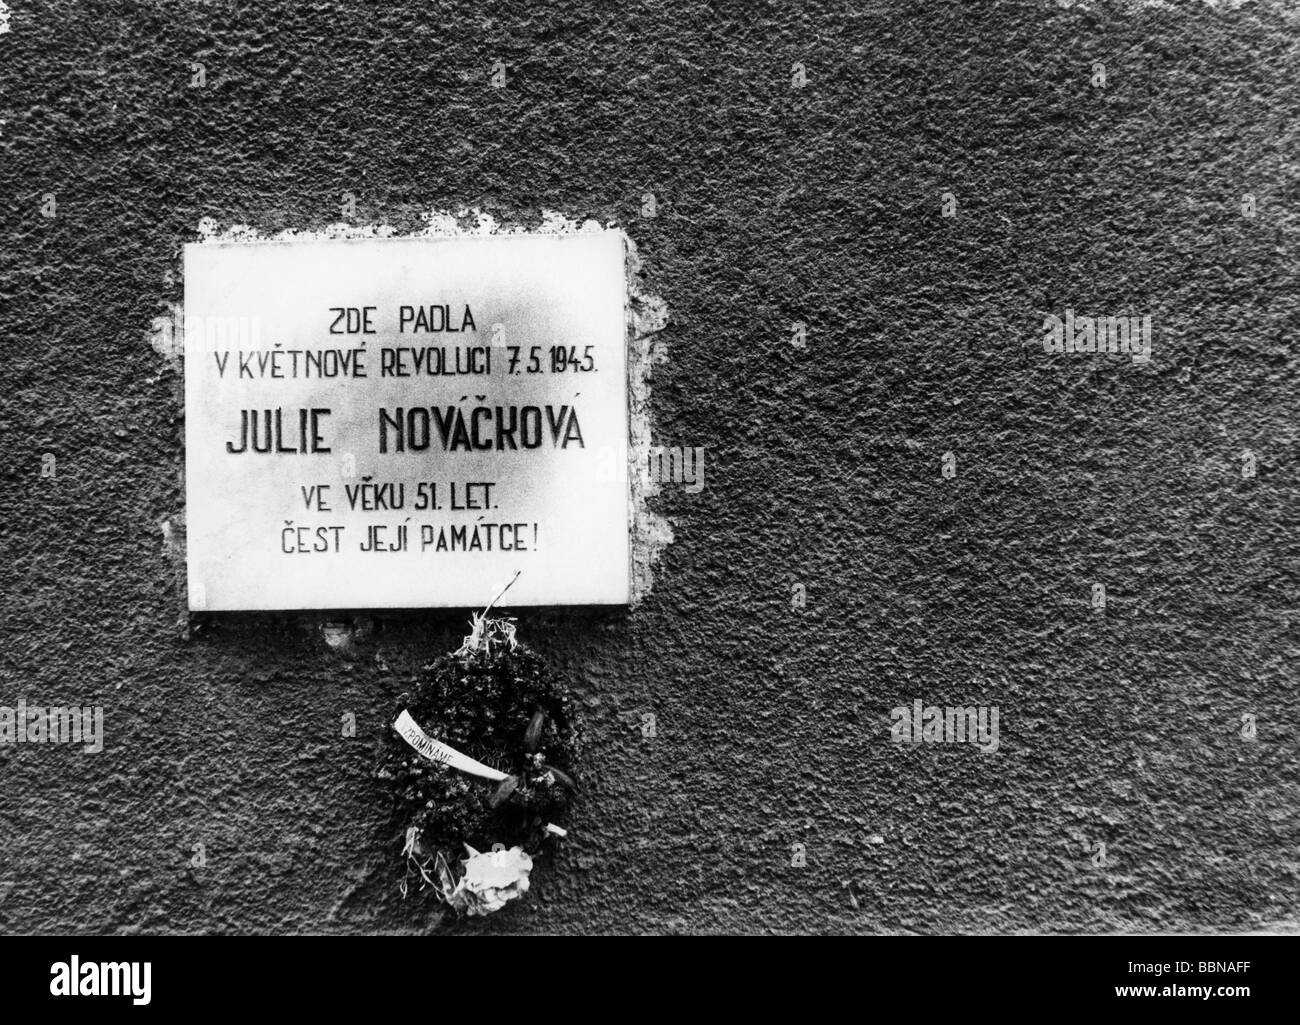 events, Second World War / WWII, Czechoslovakia, Prague Uprising, May 1945, memorial plaque for a 51 year old woman who was killed during the fightings on 7.5.1945, revolt, insurrection, resistance, end of war, victim, victims, 20th century, historic, historical, 1940s, Stock Photo